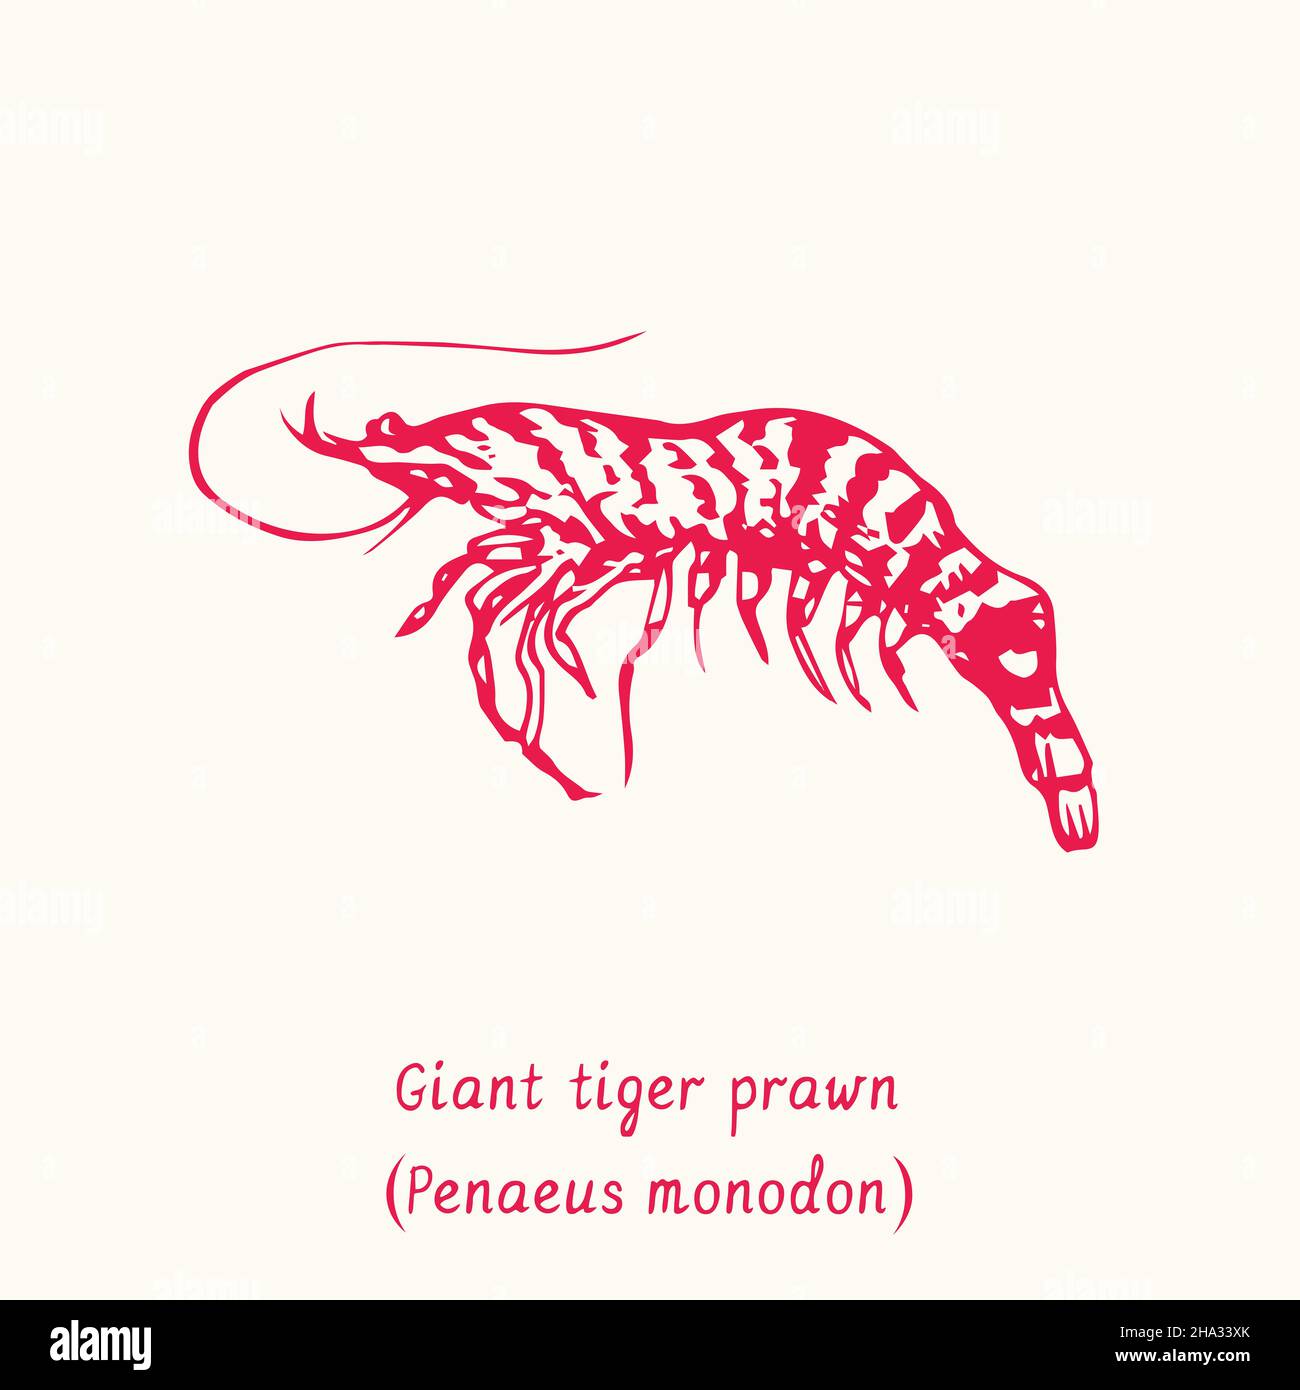 Giant tiger prawn (Penaeus monodon) side view. Ink black and white doodle drawing in woodcut style with inscription. Stock Photo